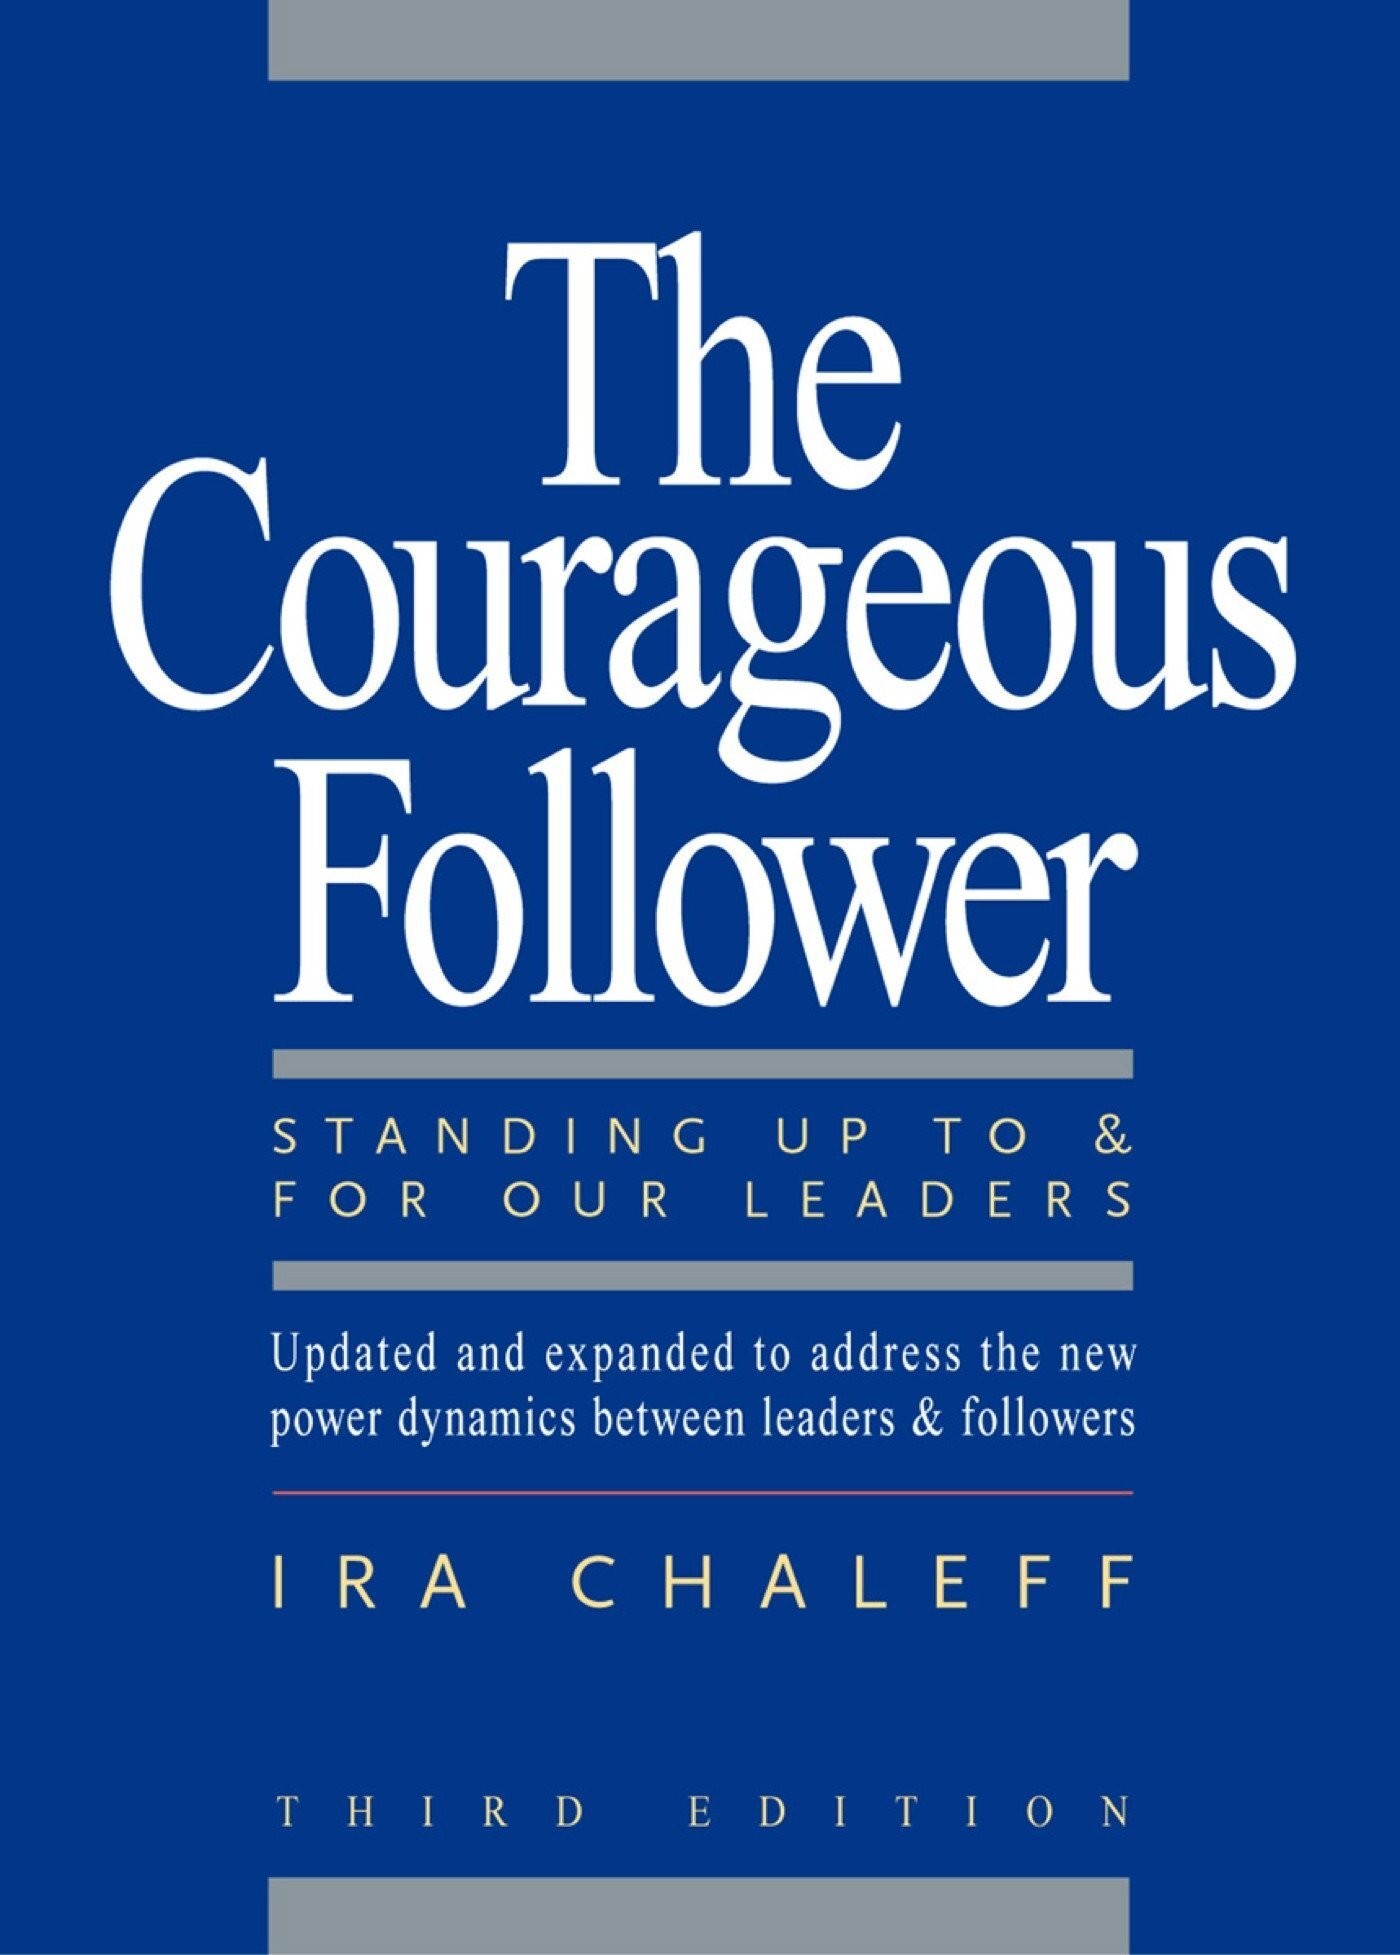 The Courageous Follower: Standing Up To & For Our Leaders - Ira Chaleff